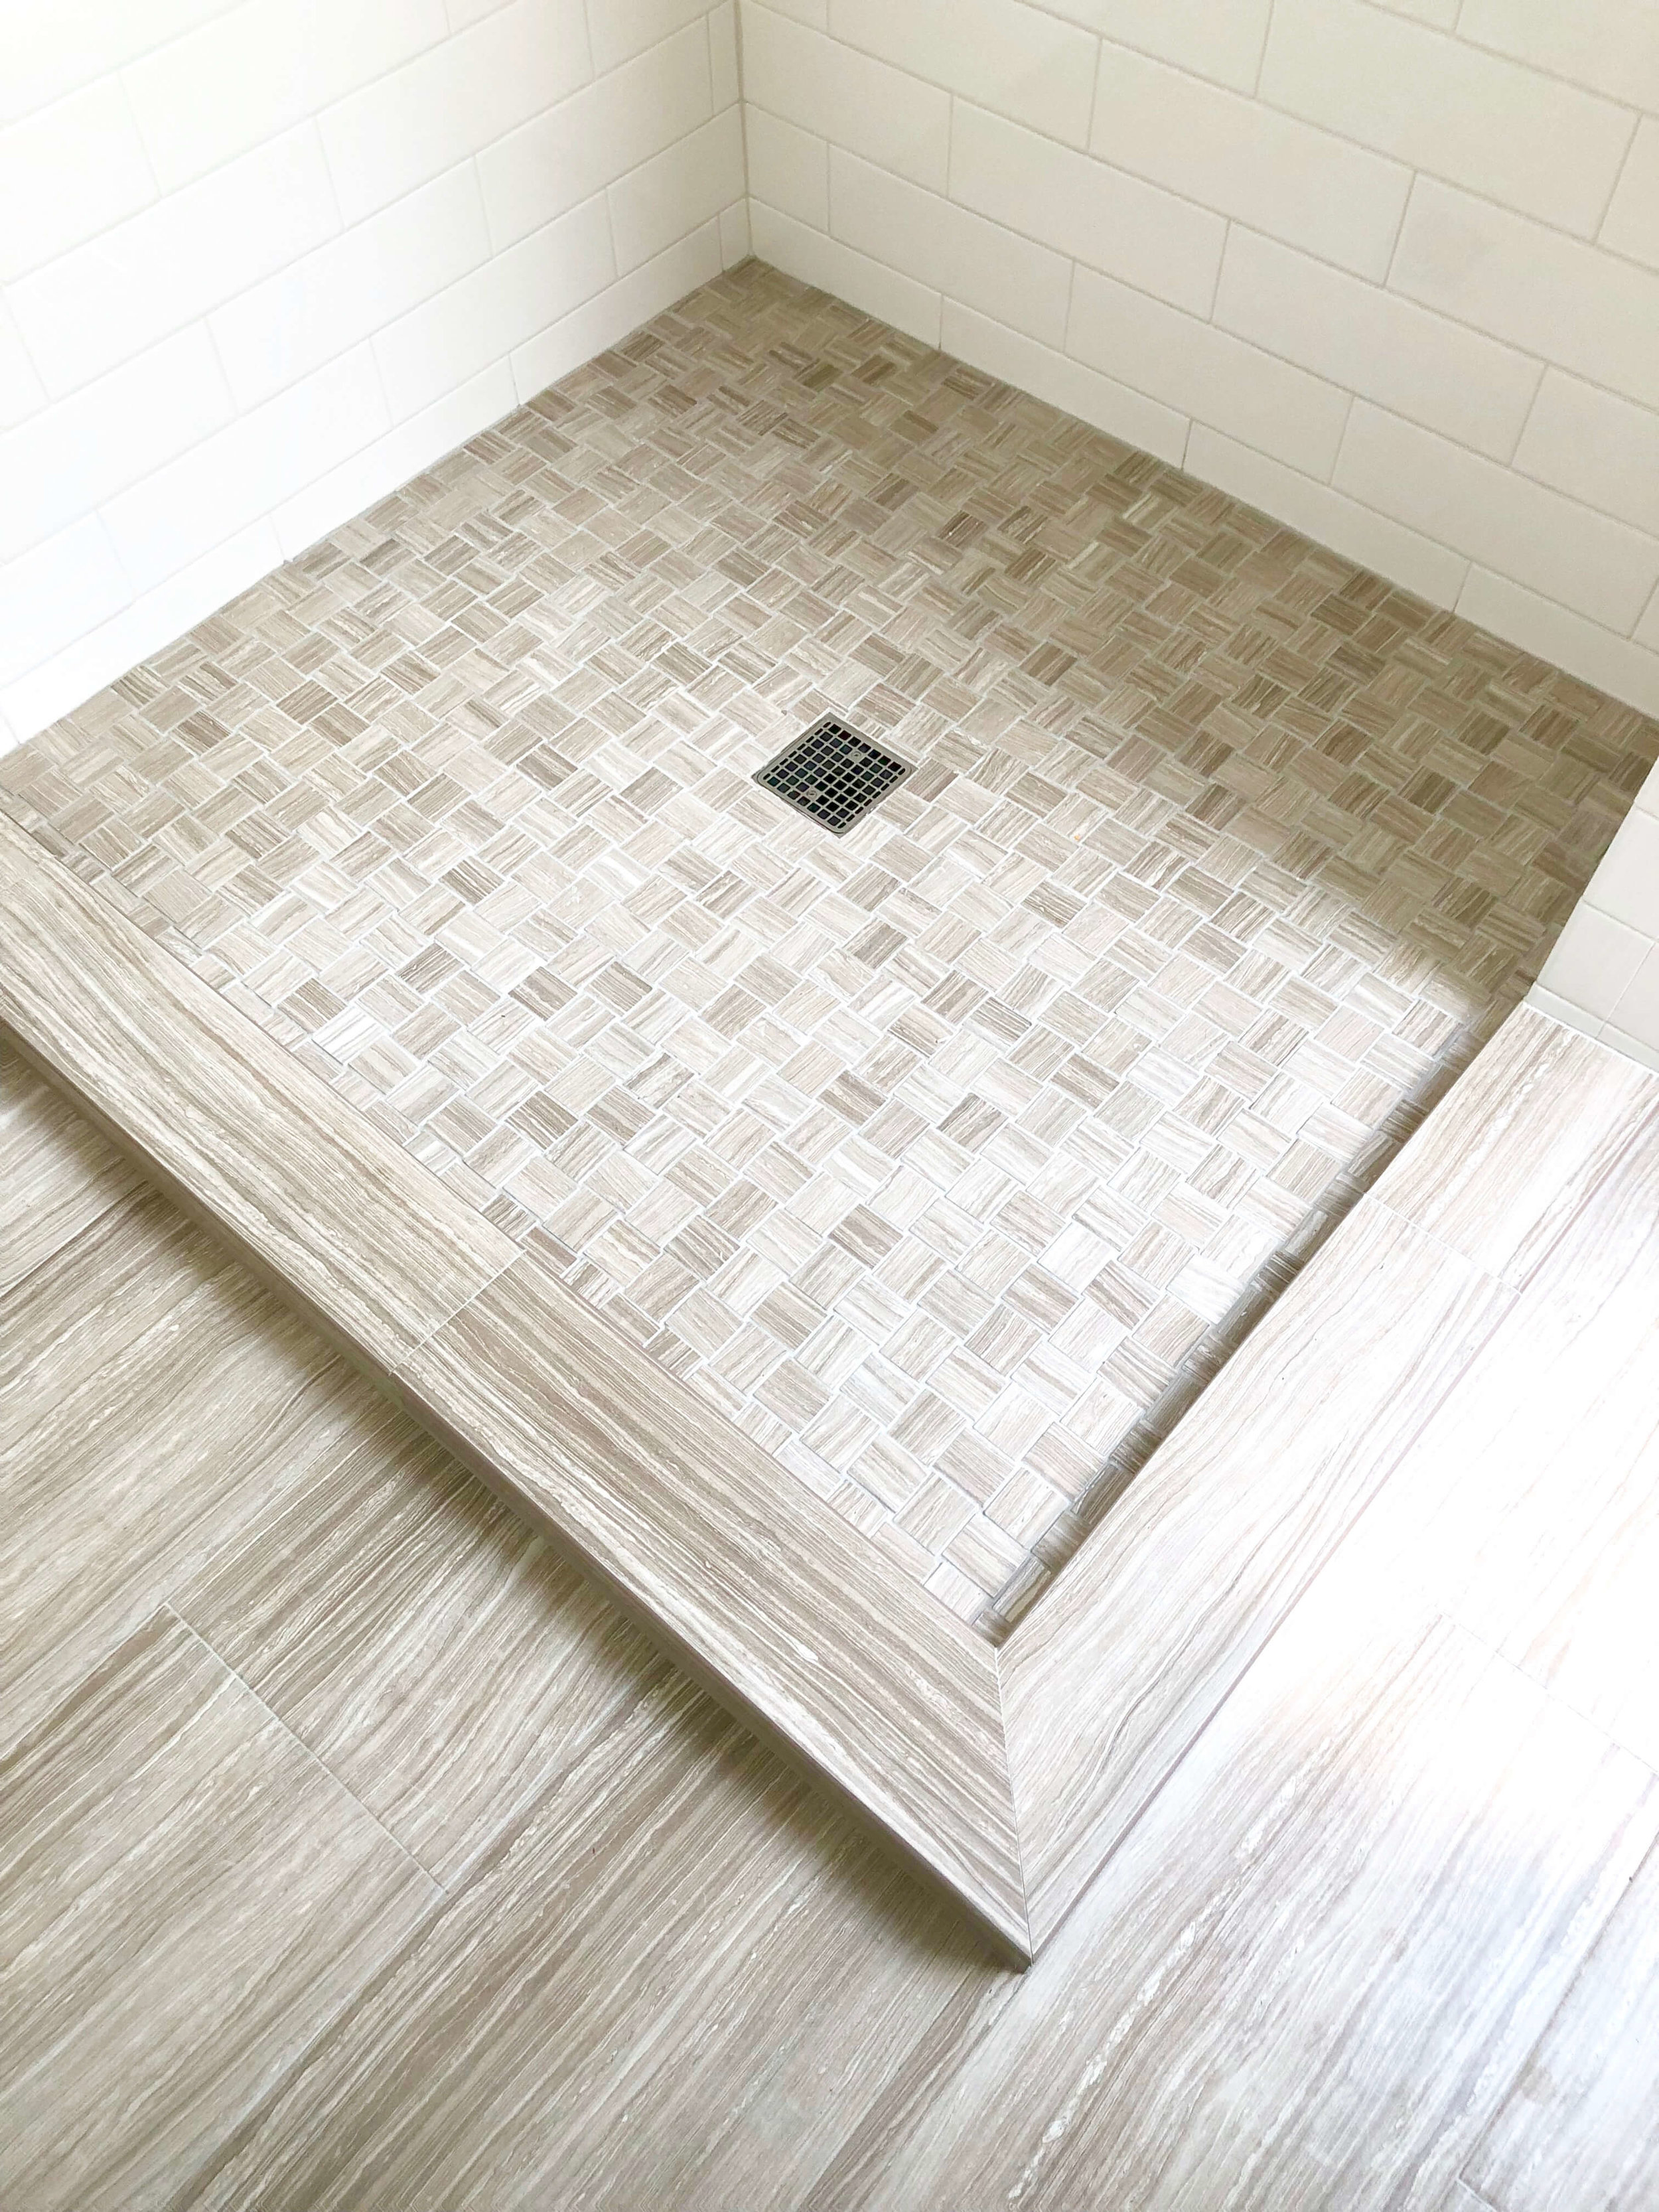 Small Bathroom Look Bigger, How To Tile Shower Curb With Bullnose